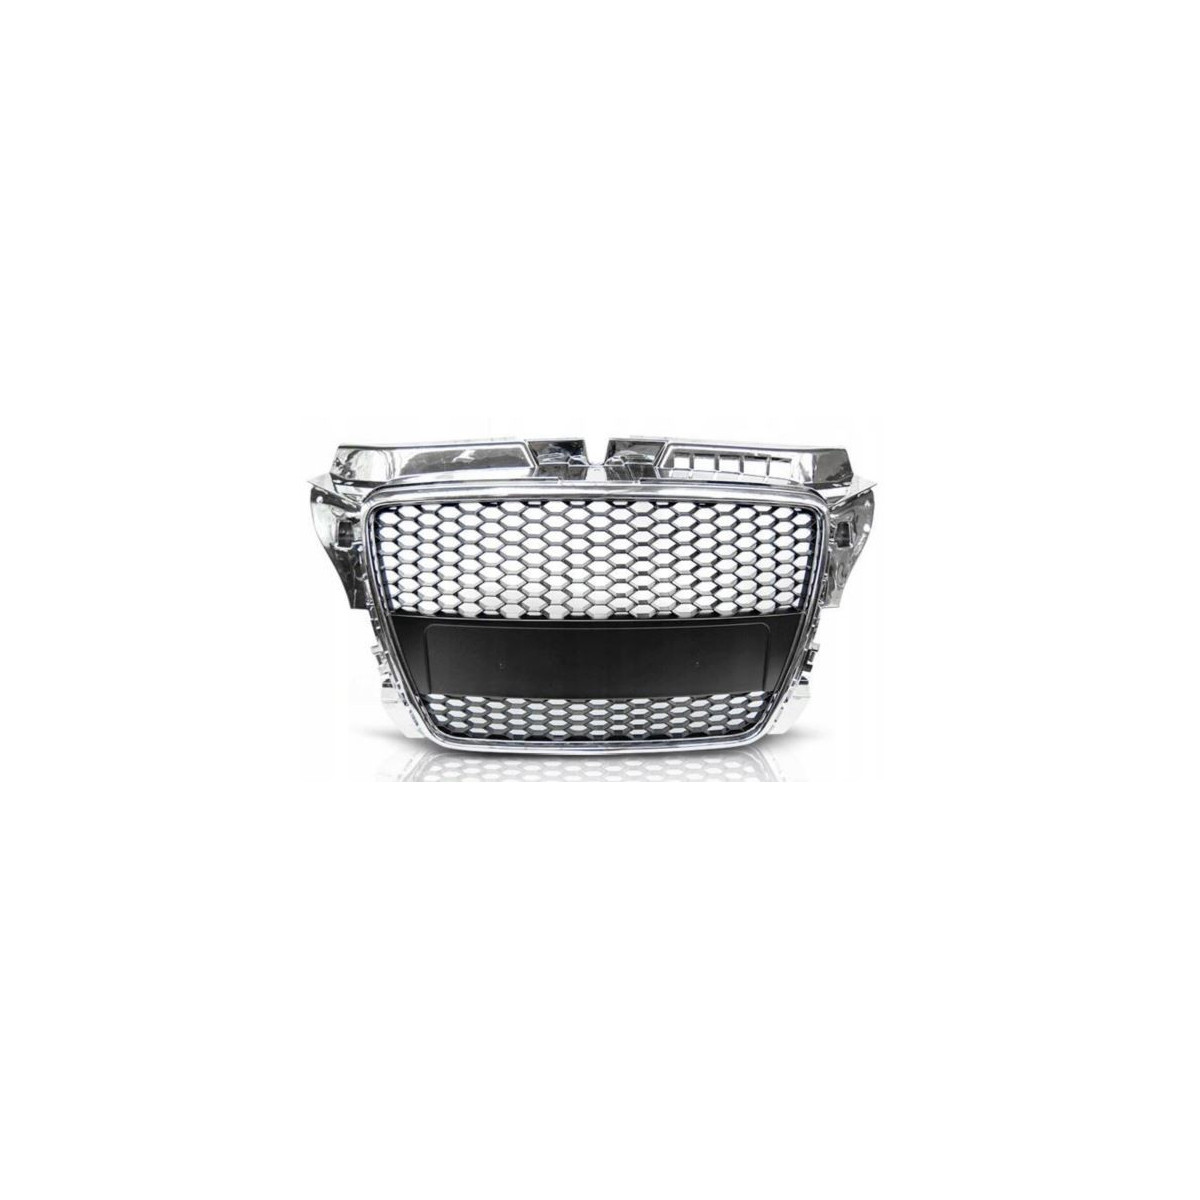 GRILL AUDI A3 (8P) RS-TYPE 4/08-7/12 CHROME